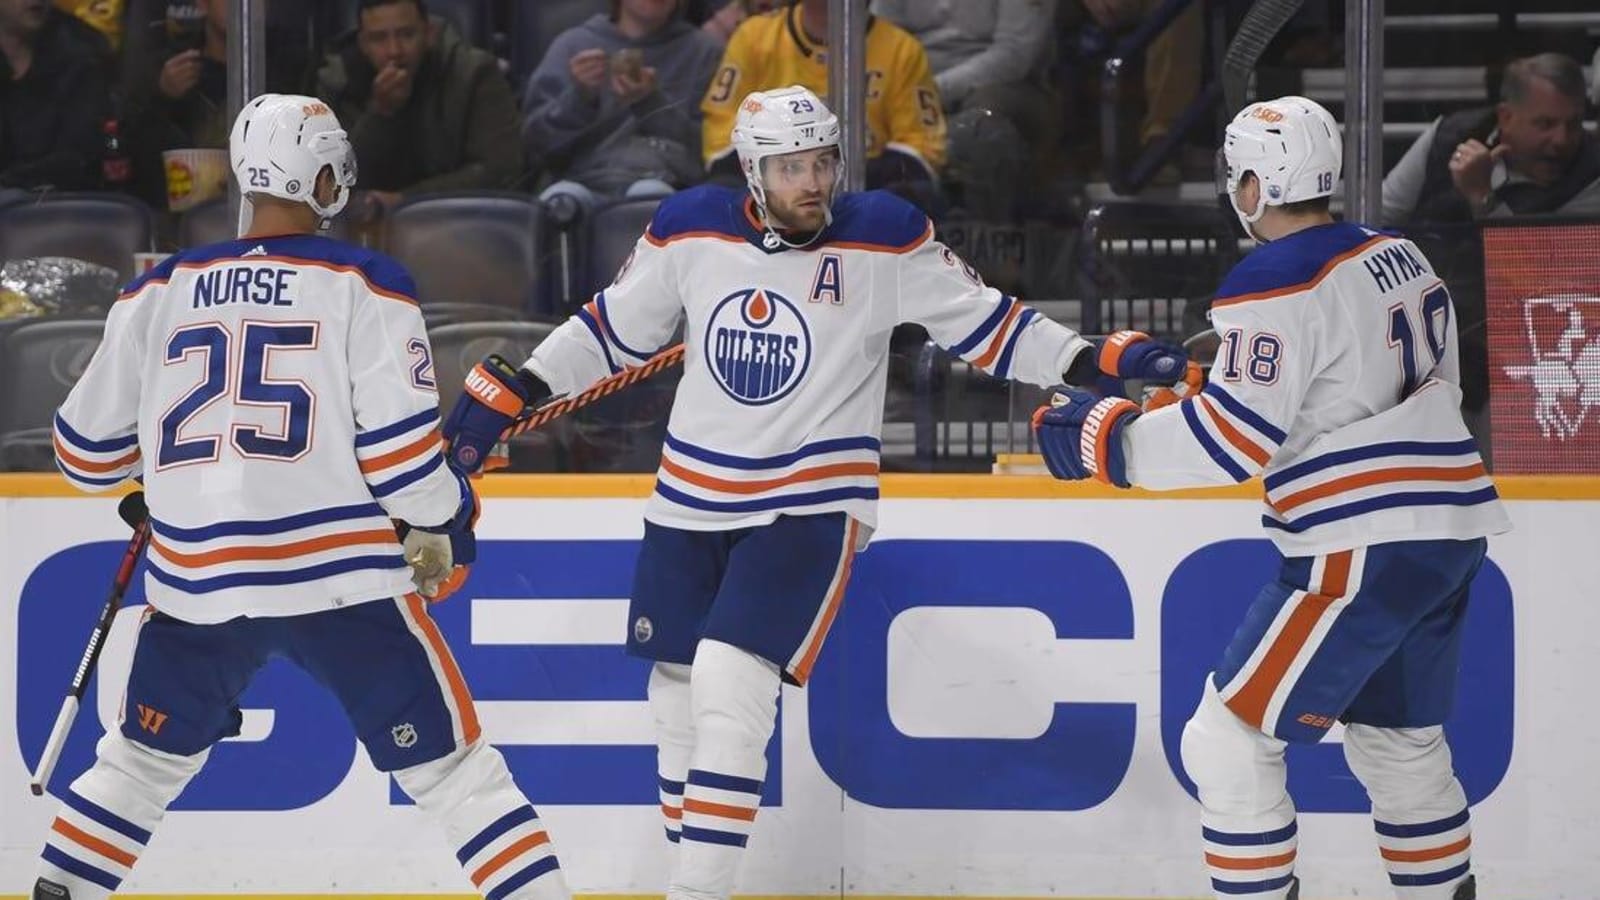 St. Louis Blues vs. Edmonton Oilers, preview, prediction, pick, odds: Can Blues cool off hot Oilers?